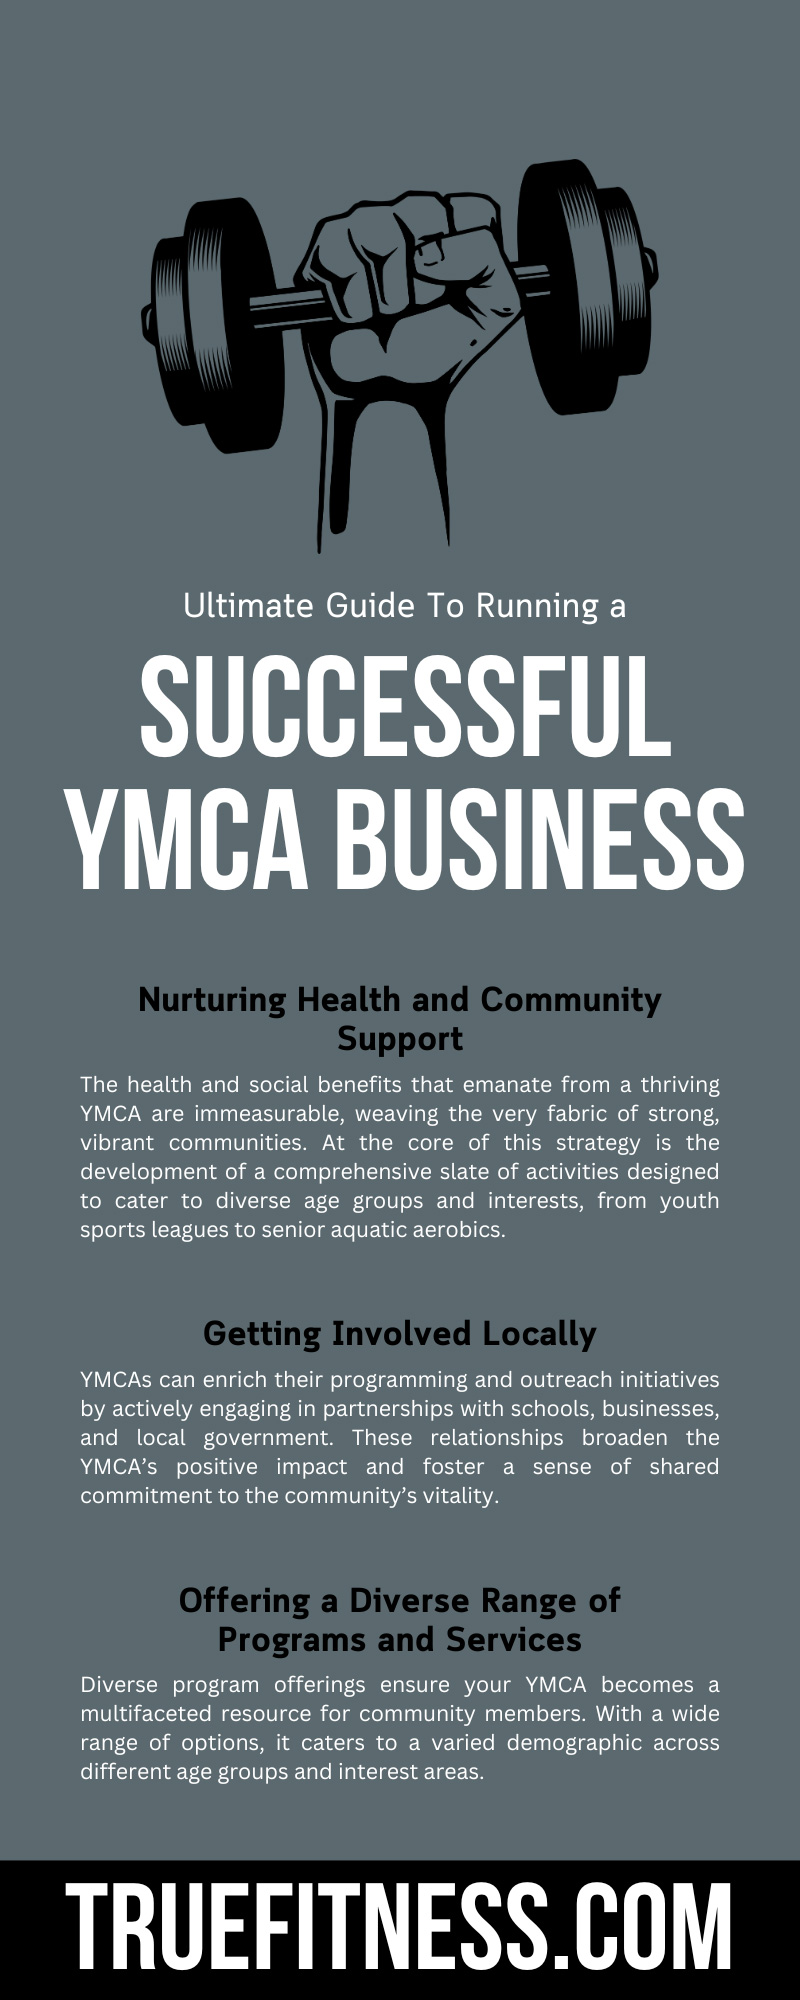 Ultimate Guide To Running a Successful YMCA Business